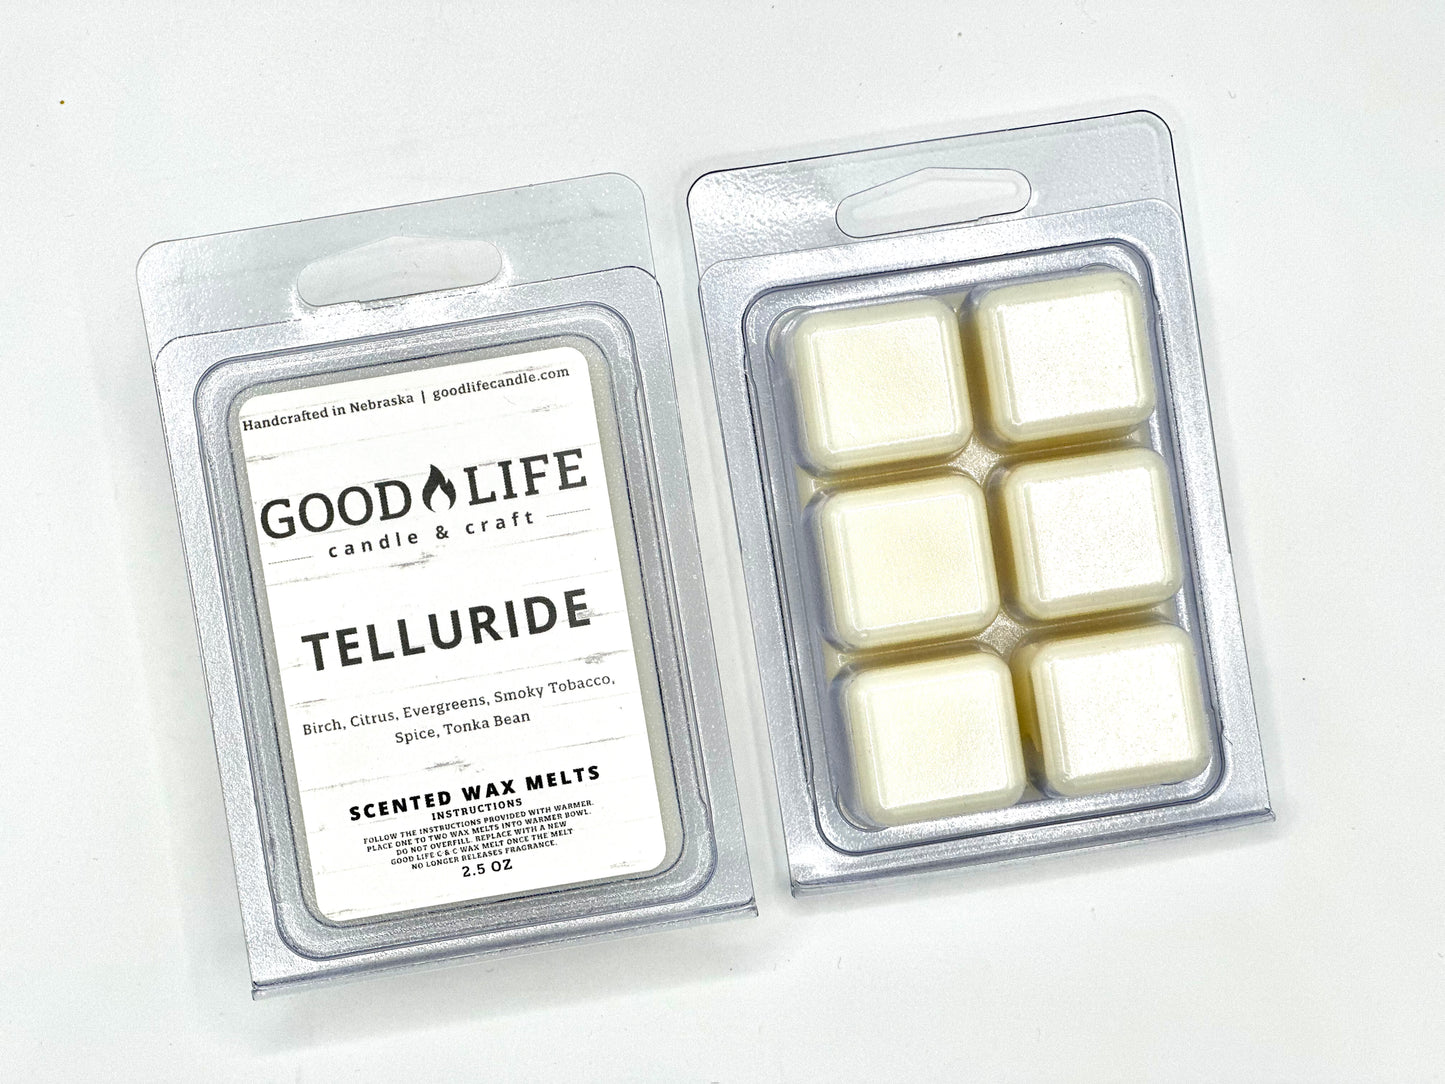 Telluride Scented Wax Melts